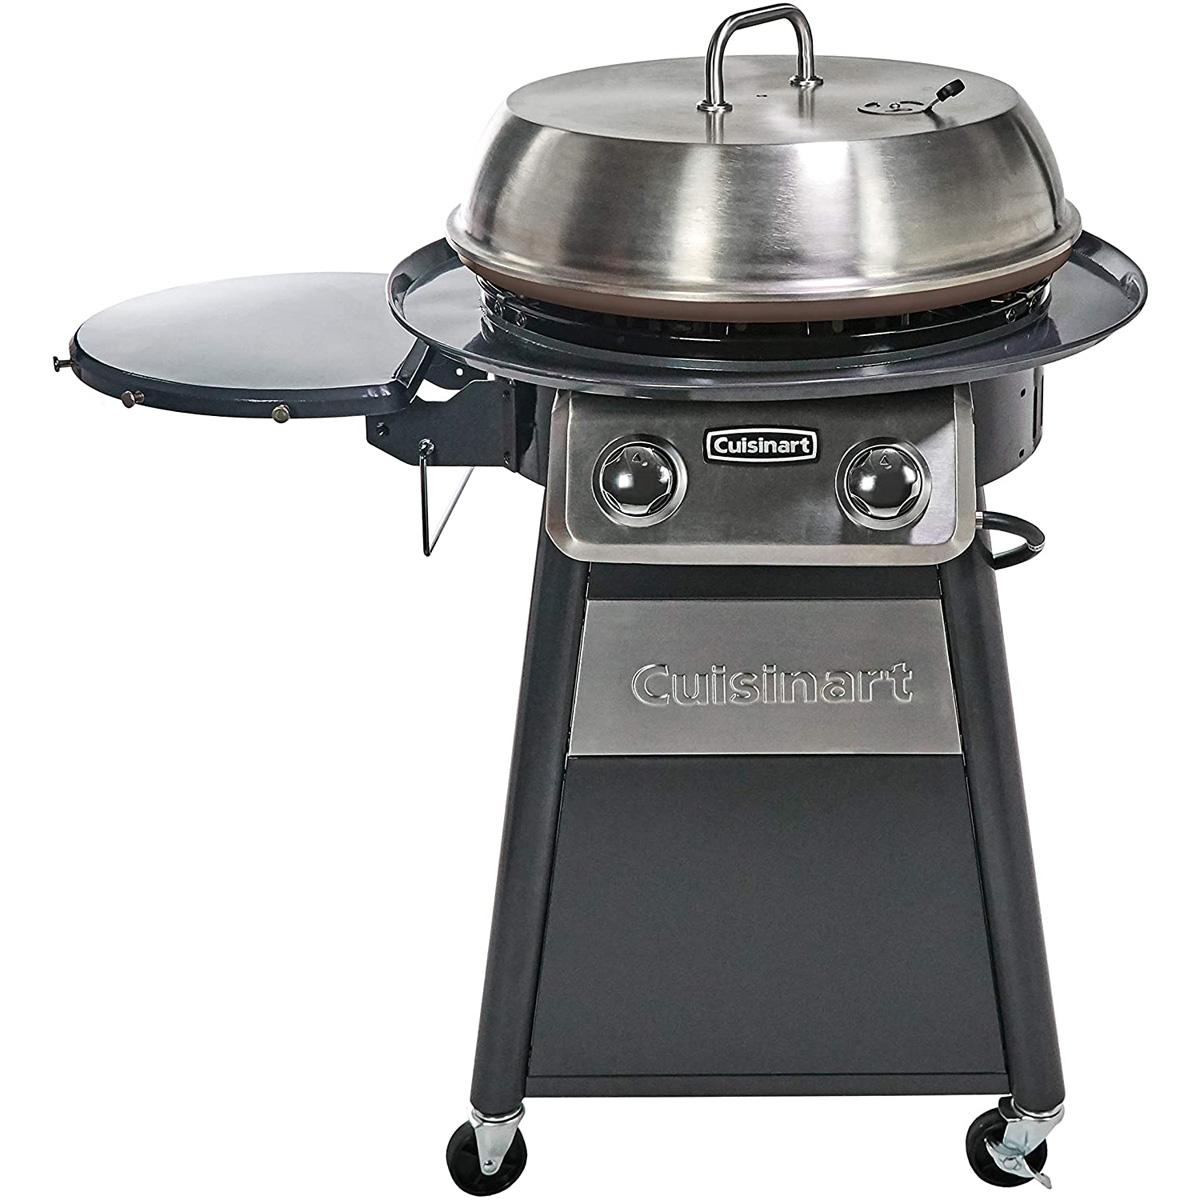 Cuisinart CGG-888 Grill 22in Round Outdoor Griddle Cooking Center for $188.30 Shipped